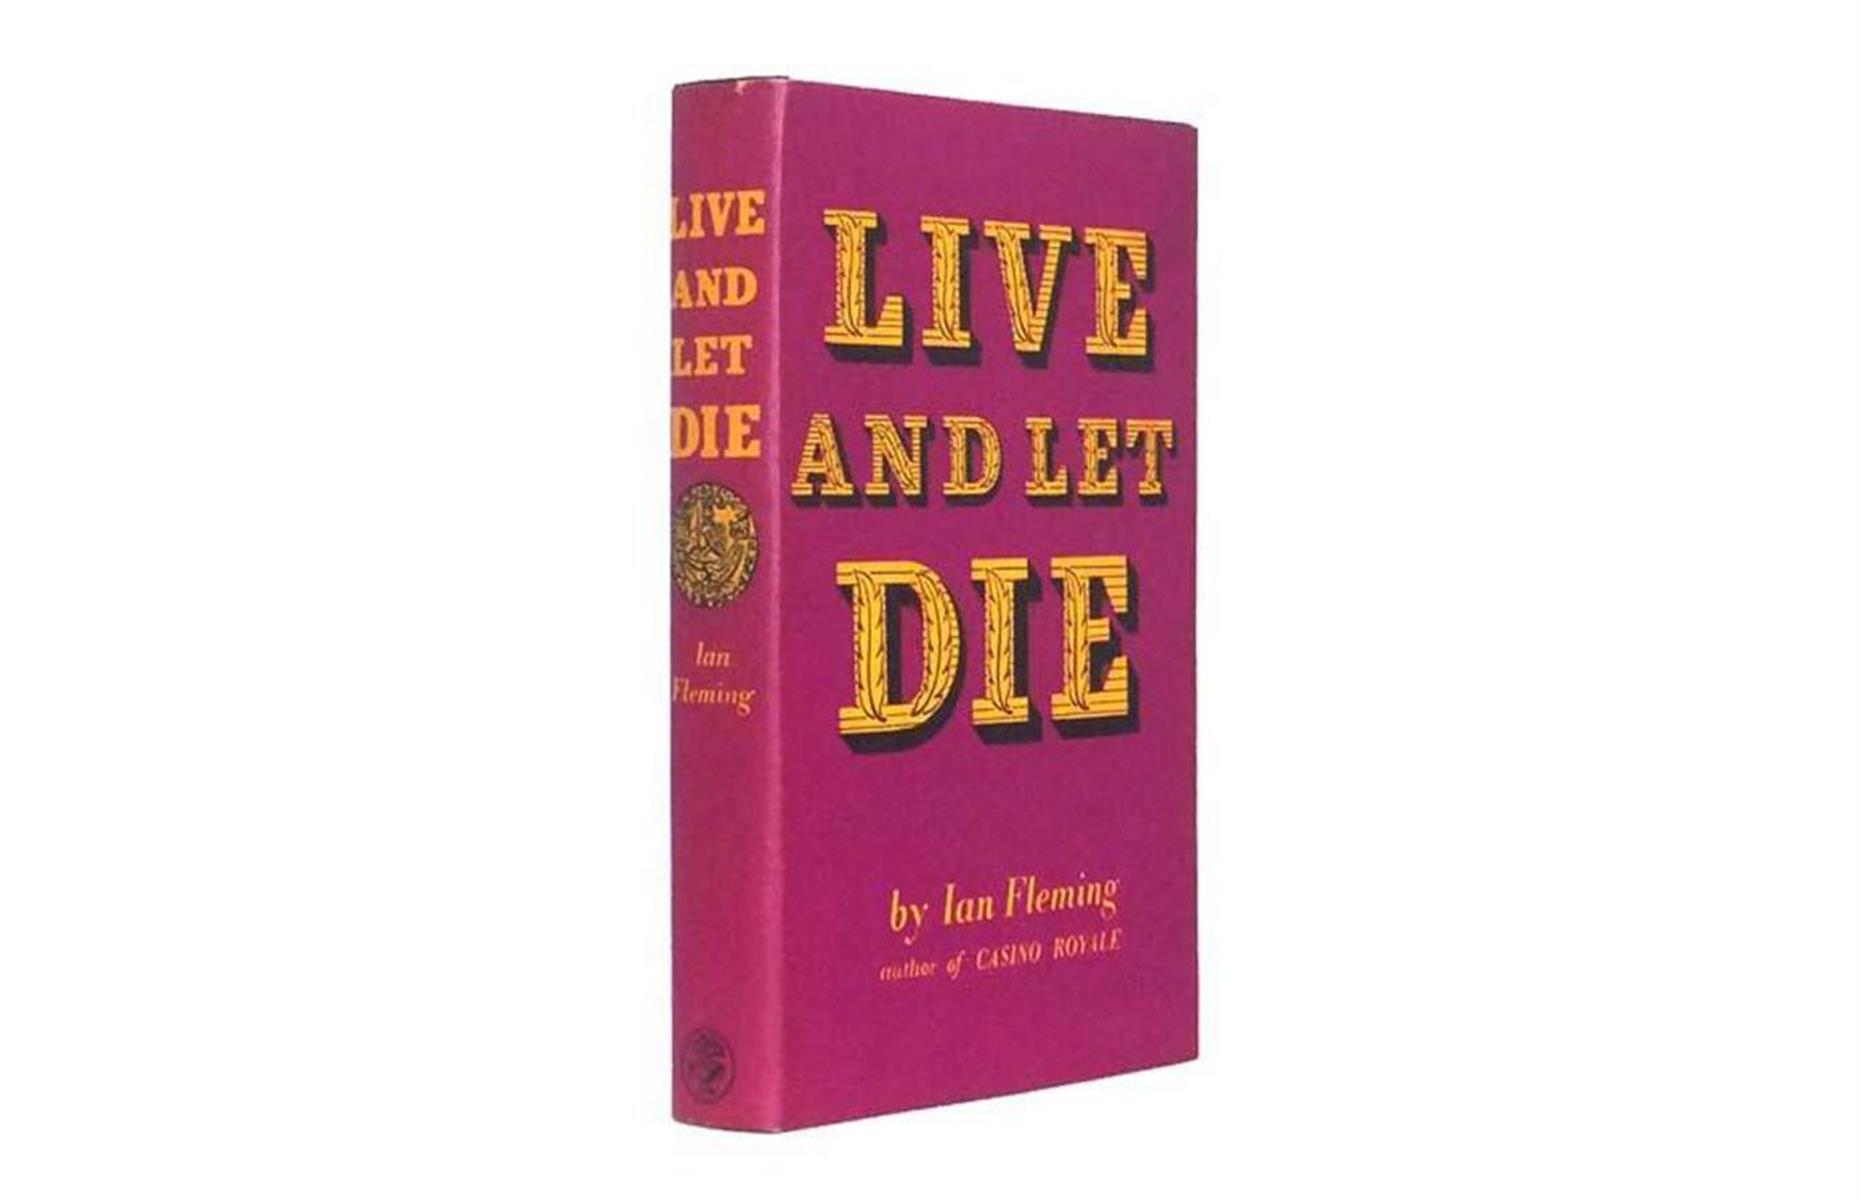 Live and Let Die: up to $35,000 (£28,245)